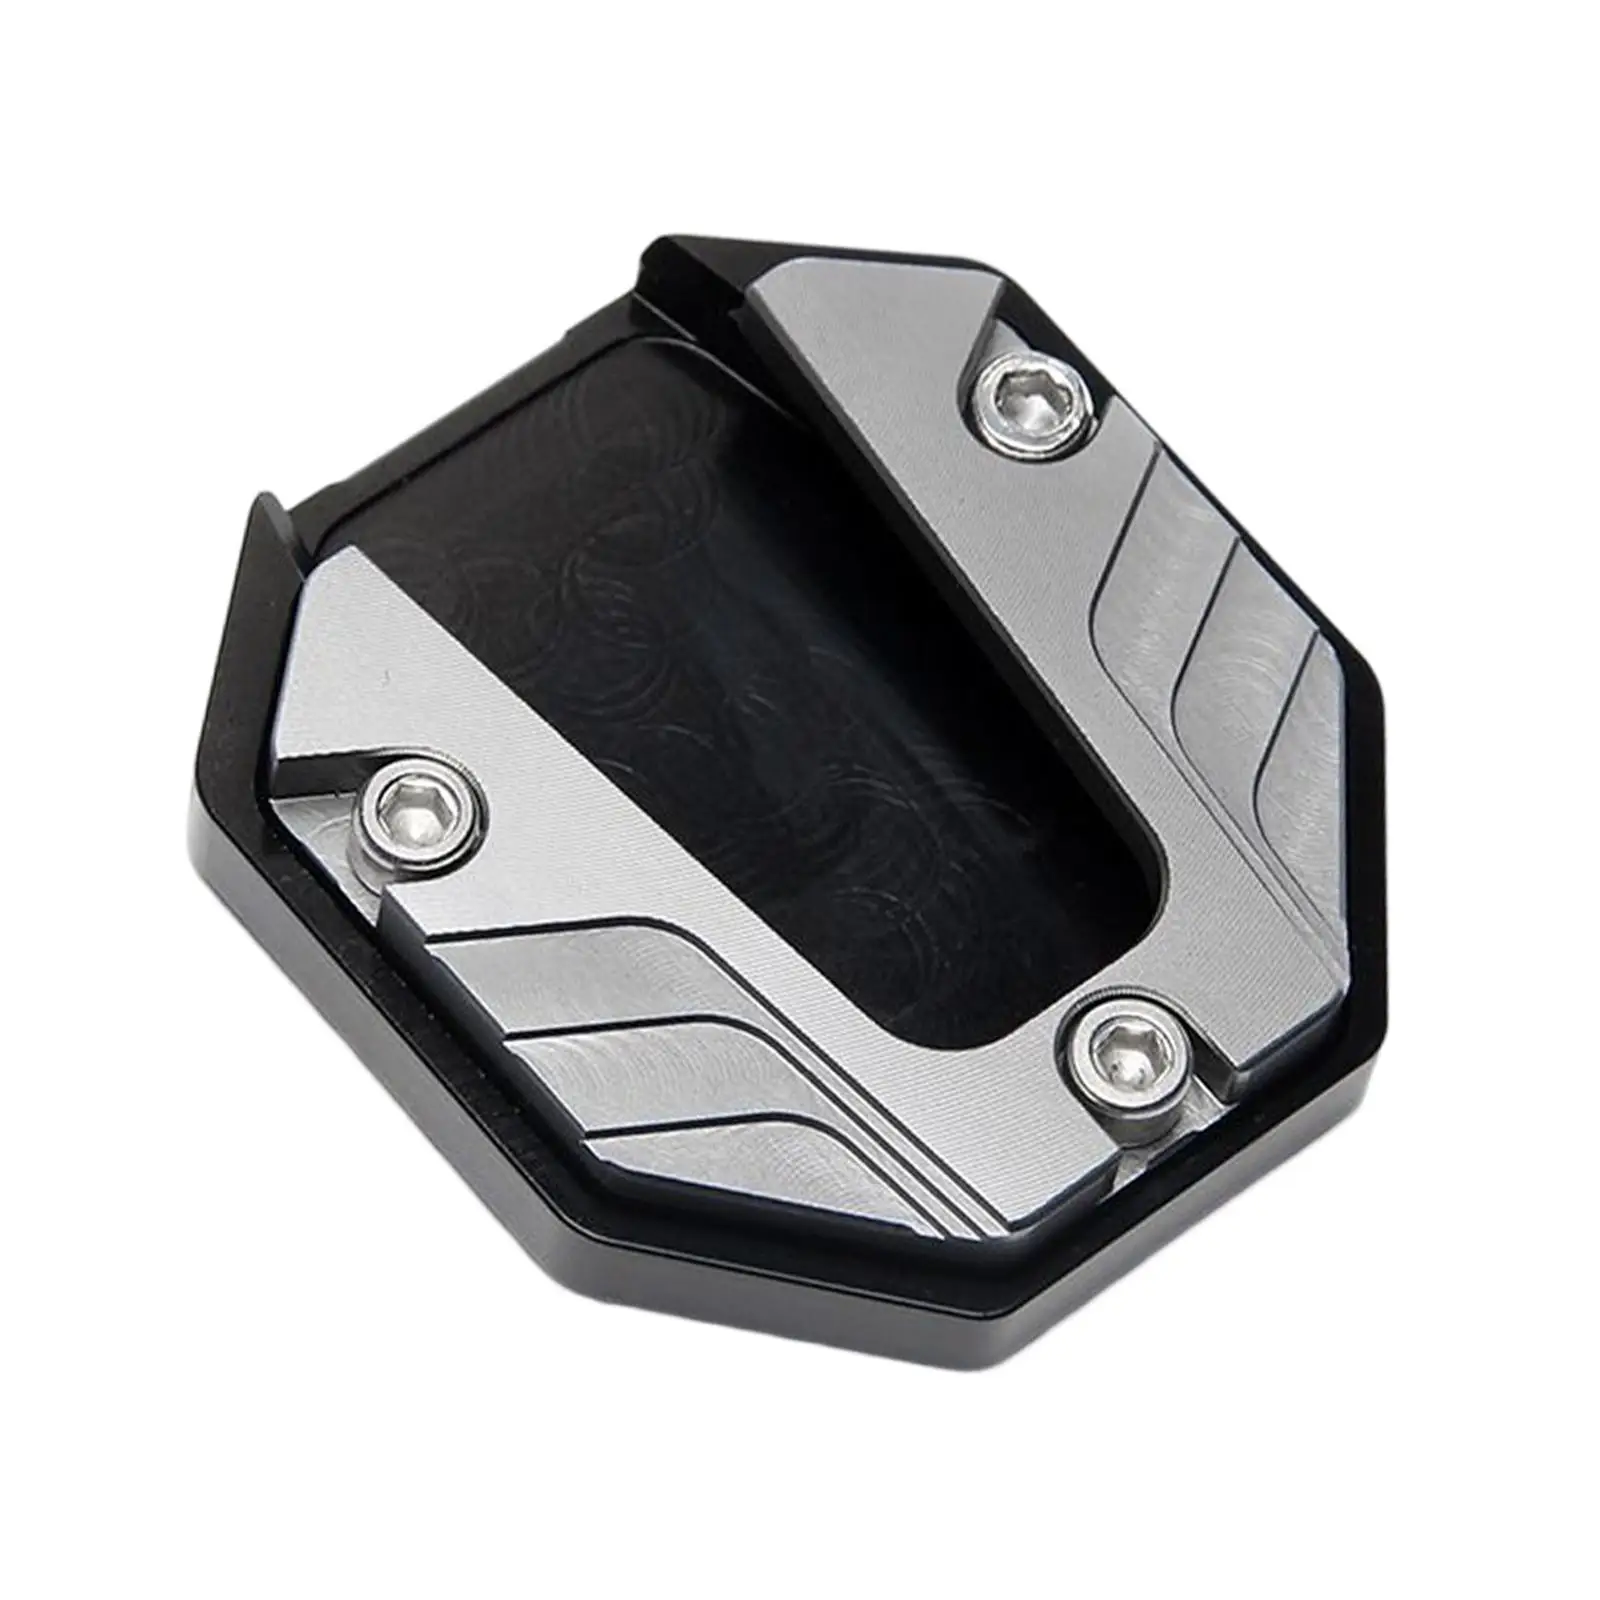 Motorcycle Kickstand Extension Pad Universal Replaces Accessories Easily Install Premium Stable Modification Aluminum Alloy